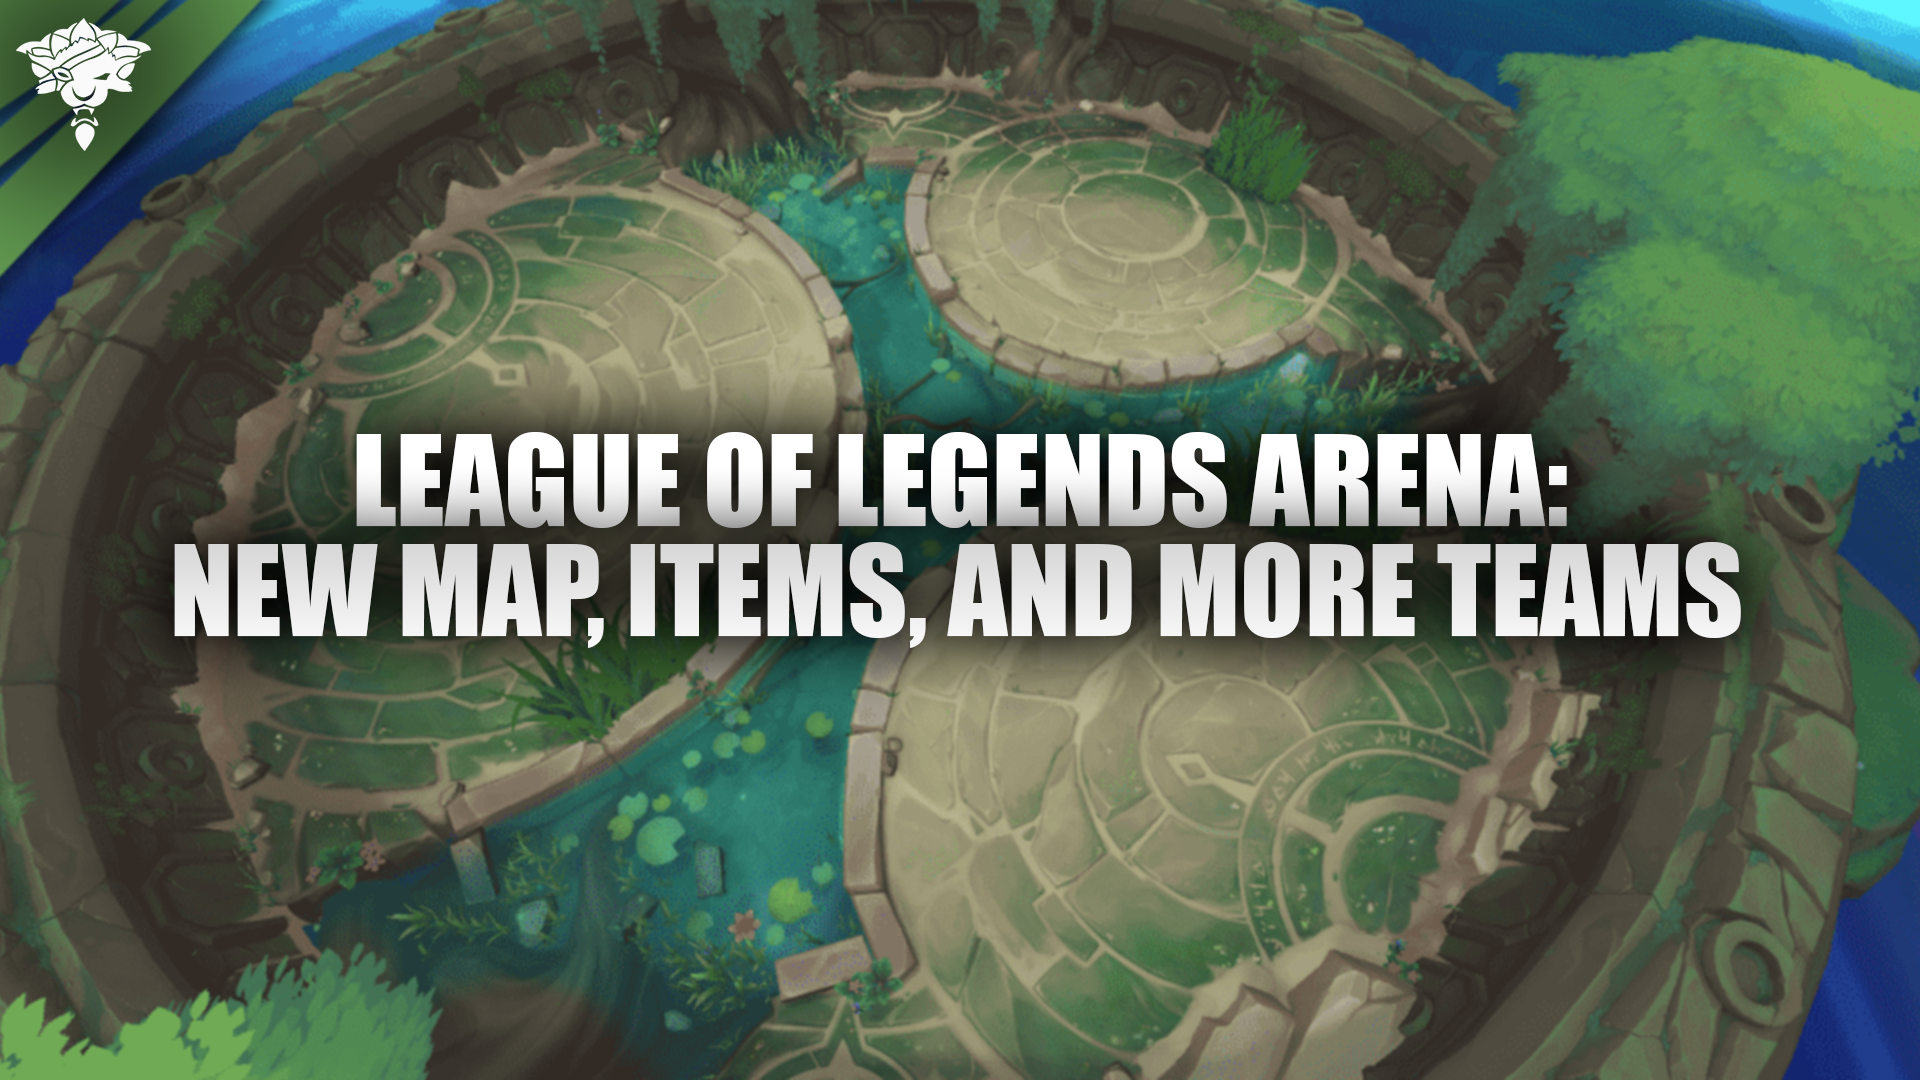 League of Legends Arena: New Map, Items, and More Teams